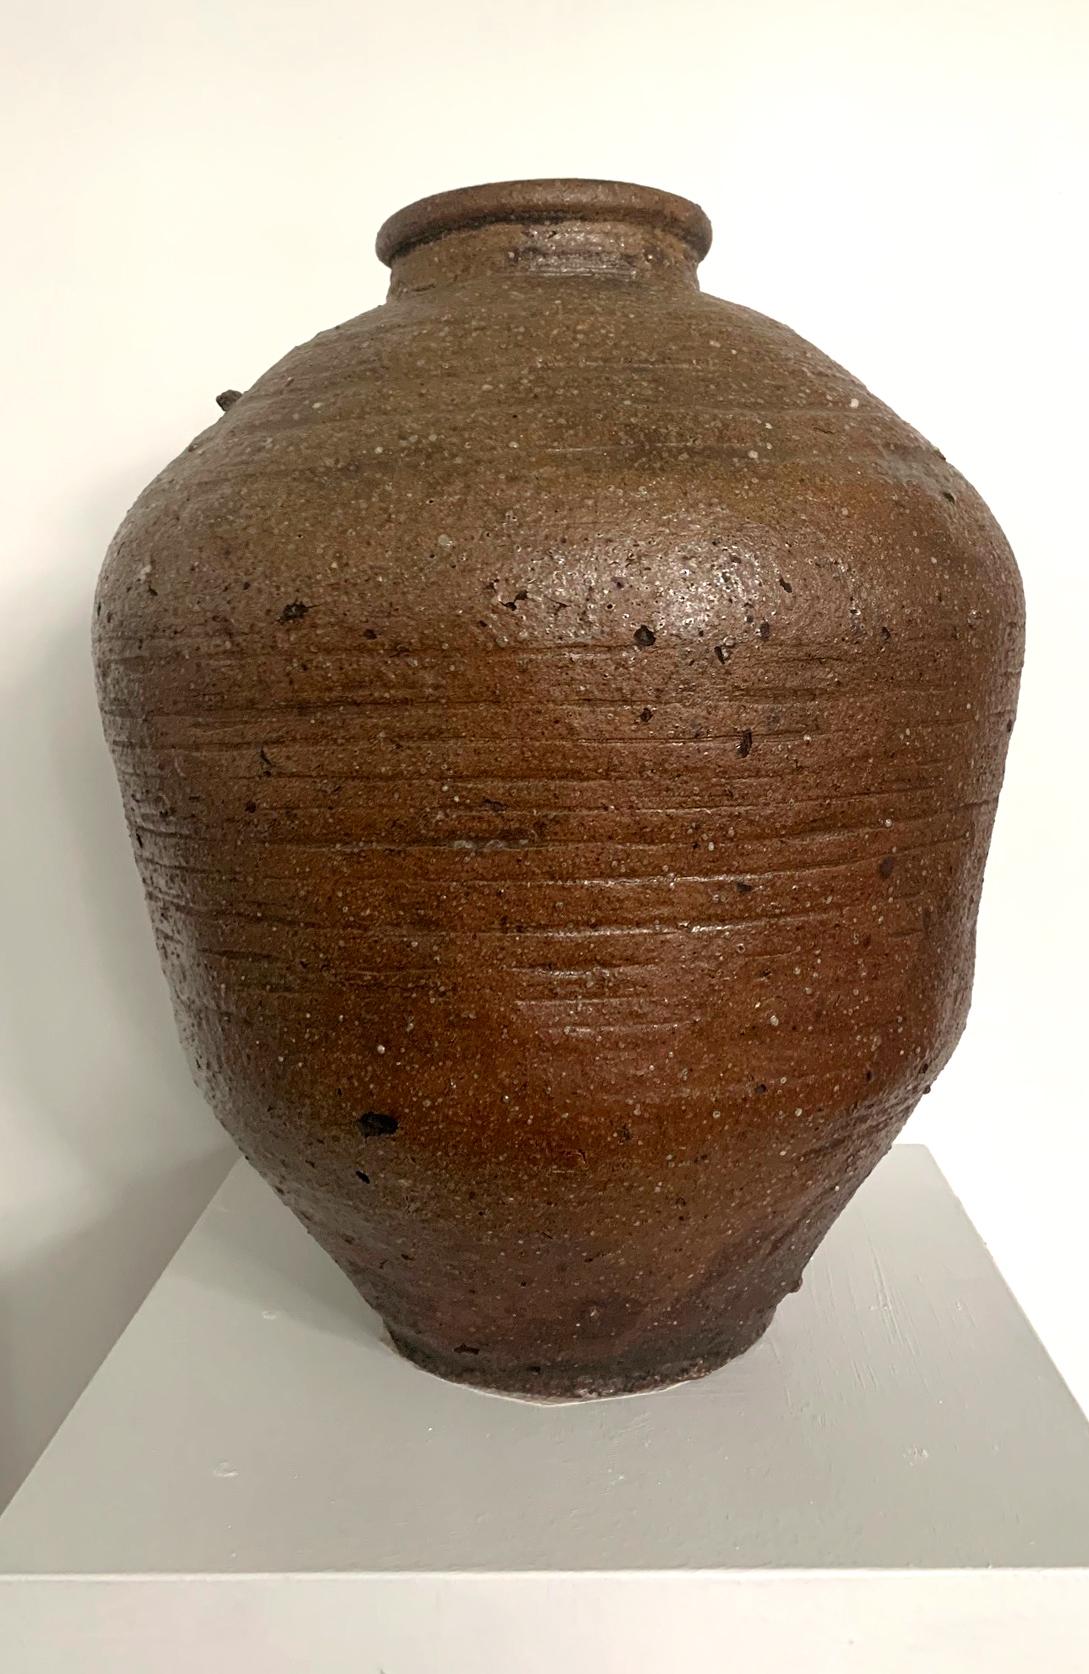 An antique Japanese stoneware storage jar, known as tsubo from Shigaraki kiln, circa 17th-18th century (early Edo possibly Momoyama period). The tsubo is of an impressive size at nearly 20 inches high, hand-built with the sandy clay from the local